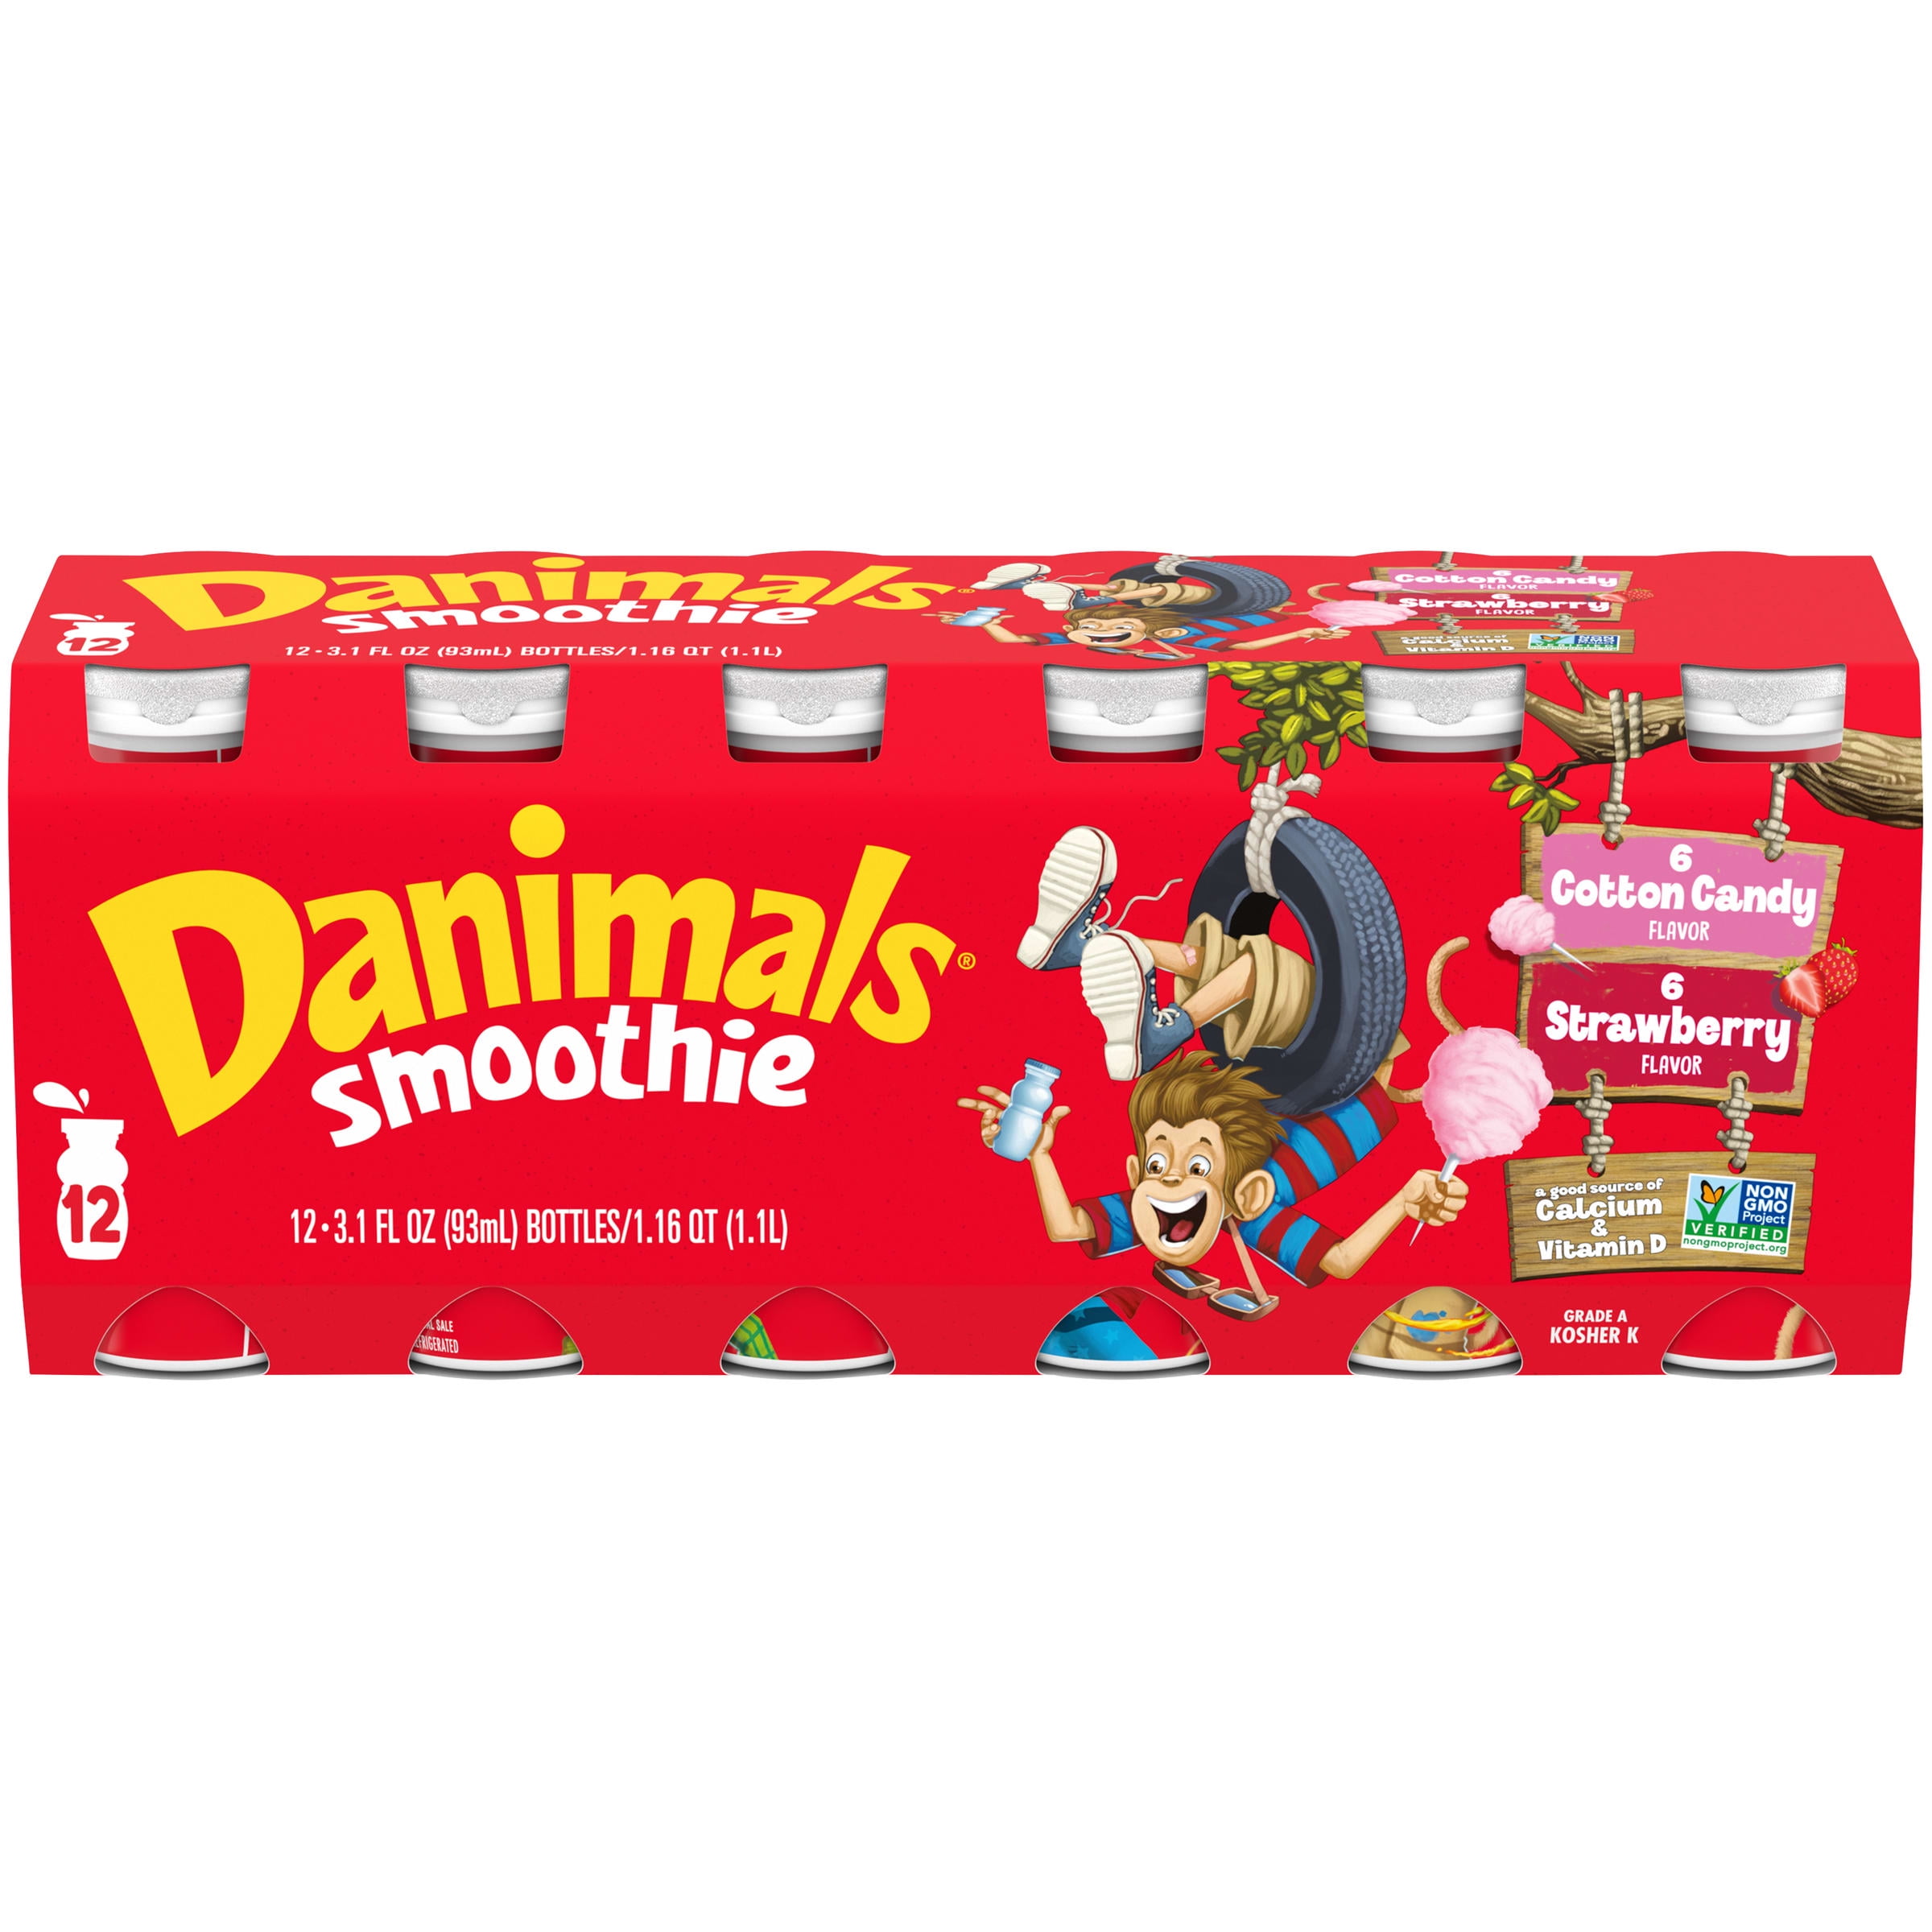 Dannon Danimals Smoothies, 6 Pack, Cotton Candy